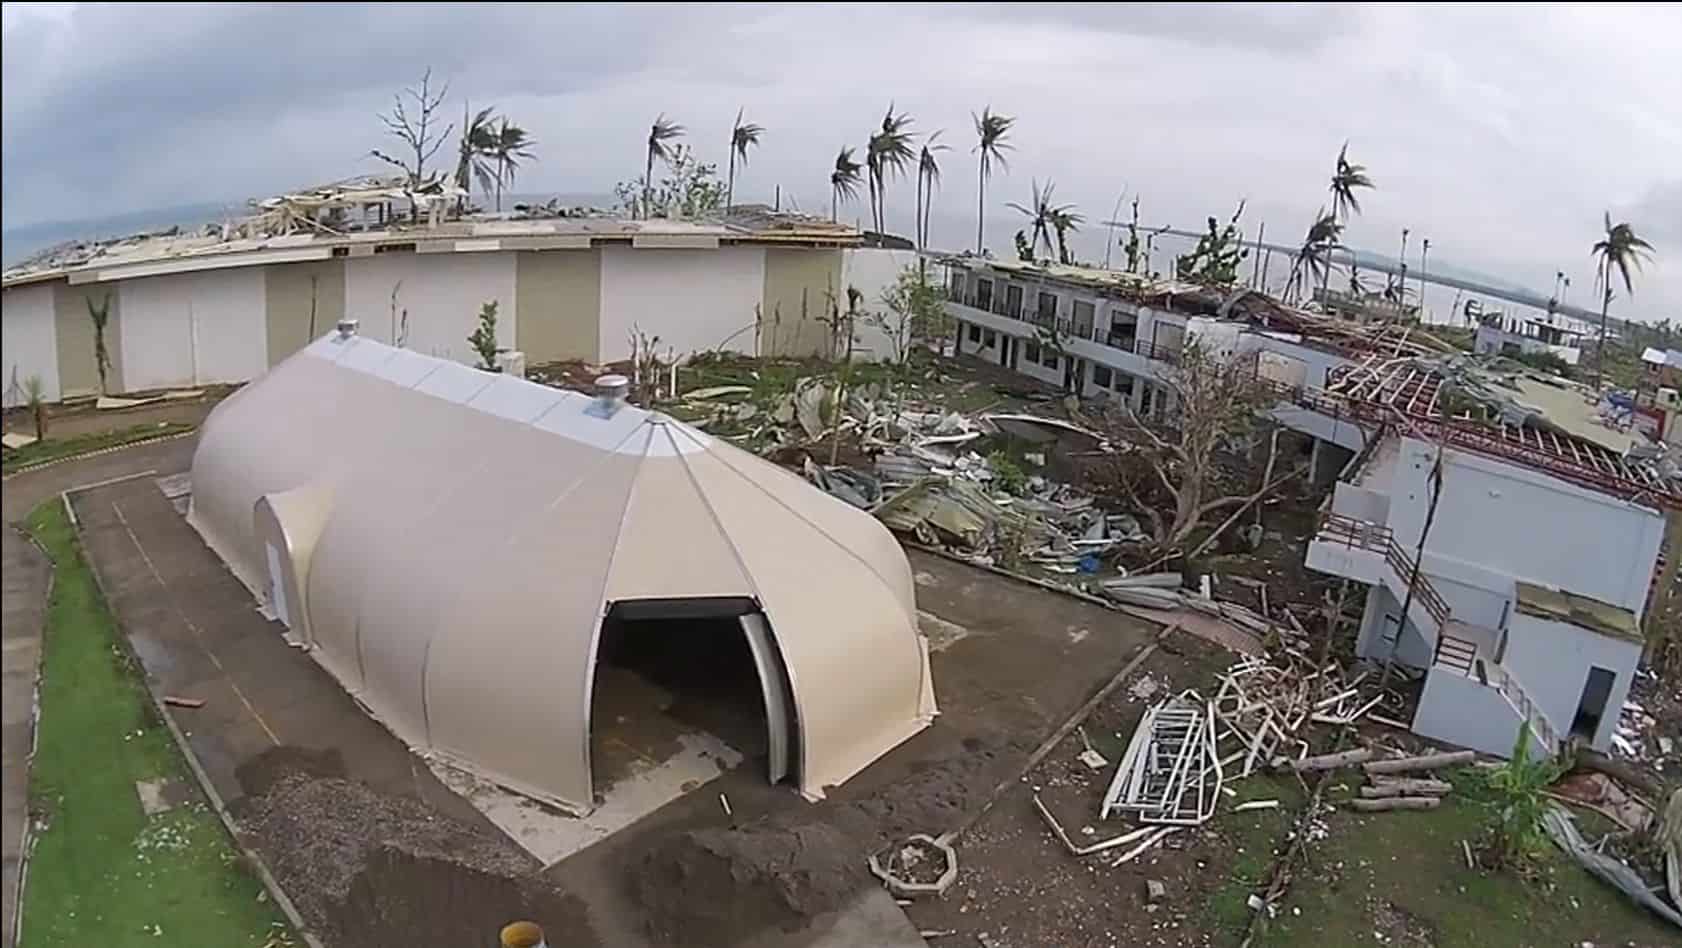 The Sprung Structure relocatable building, 16-meter-by-32-meter, will be erected in Barbuda to serve as Samaritan’s Purse’s operational and supply hub in the storm-battered region. In this photo is the Spring Structure where it was on location in the Philippines as part of the response to help Typhoon Haiyan victims.